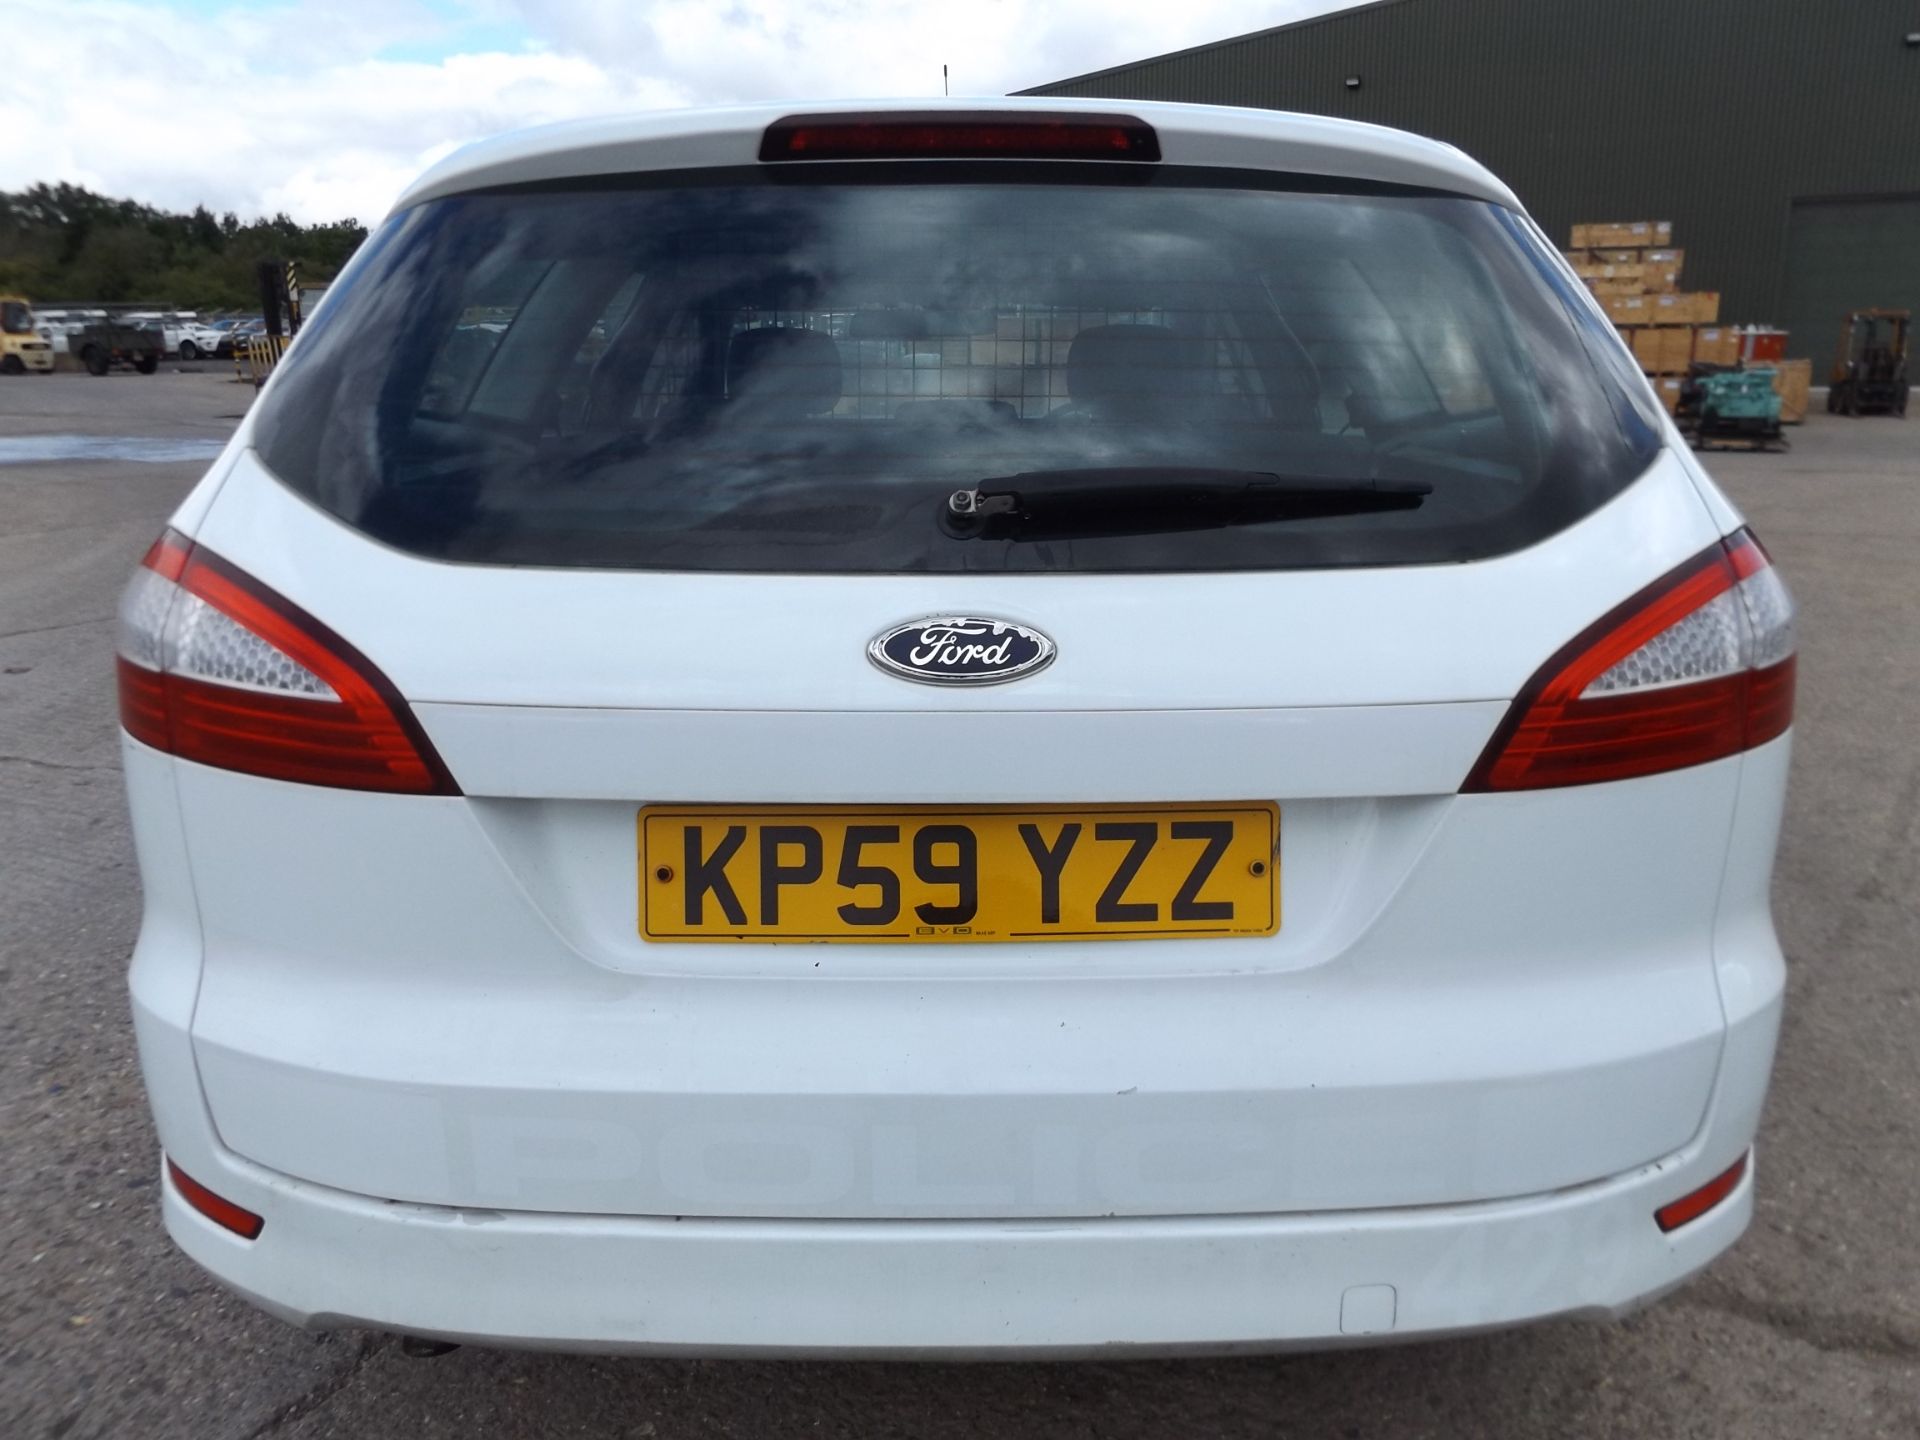 Ford Mondeo 2.0TDCi Estate - Image 7 of 19